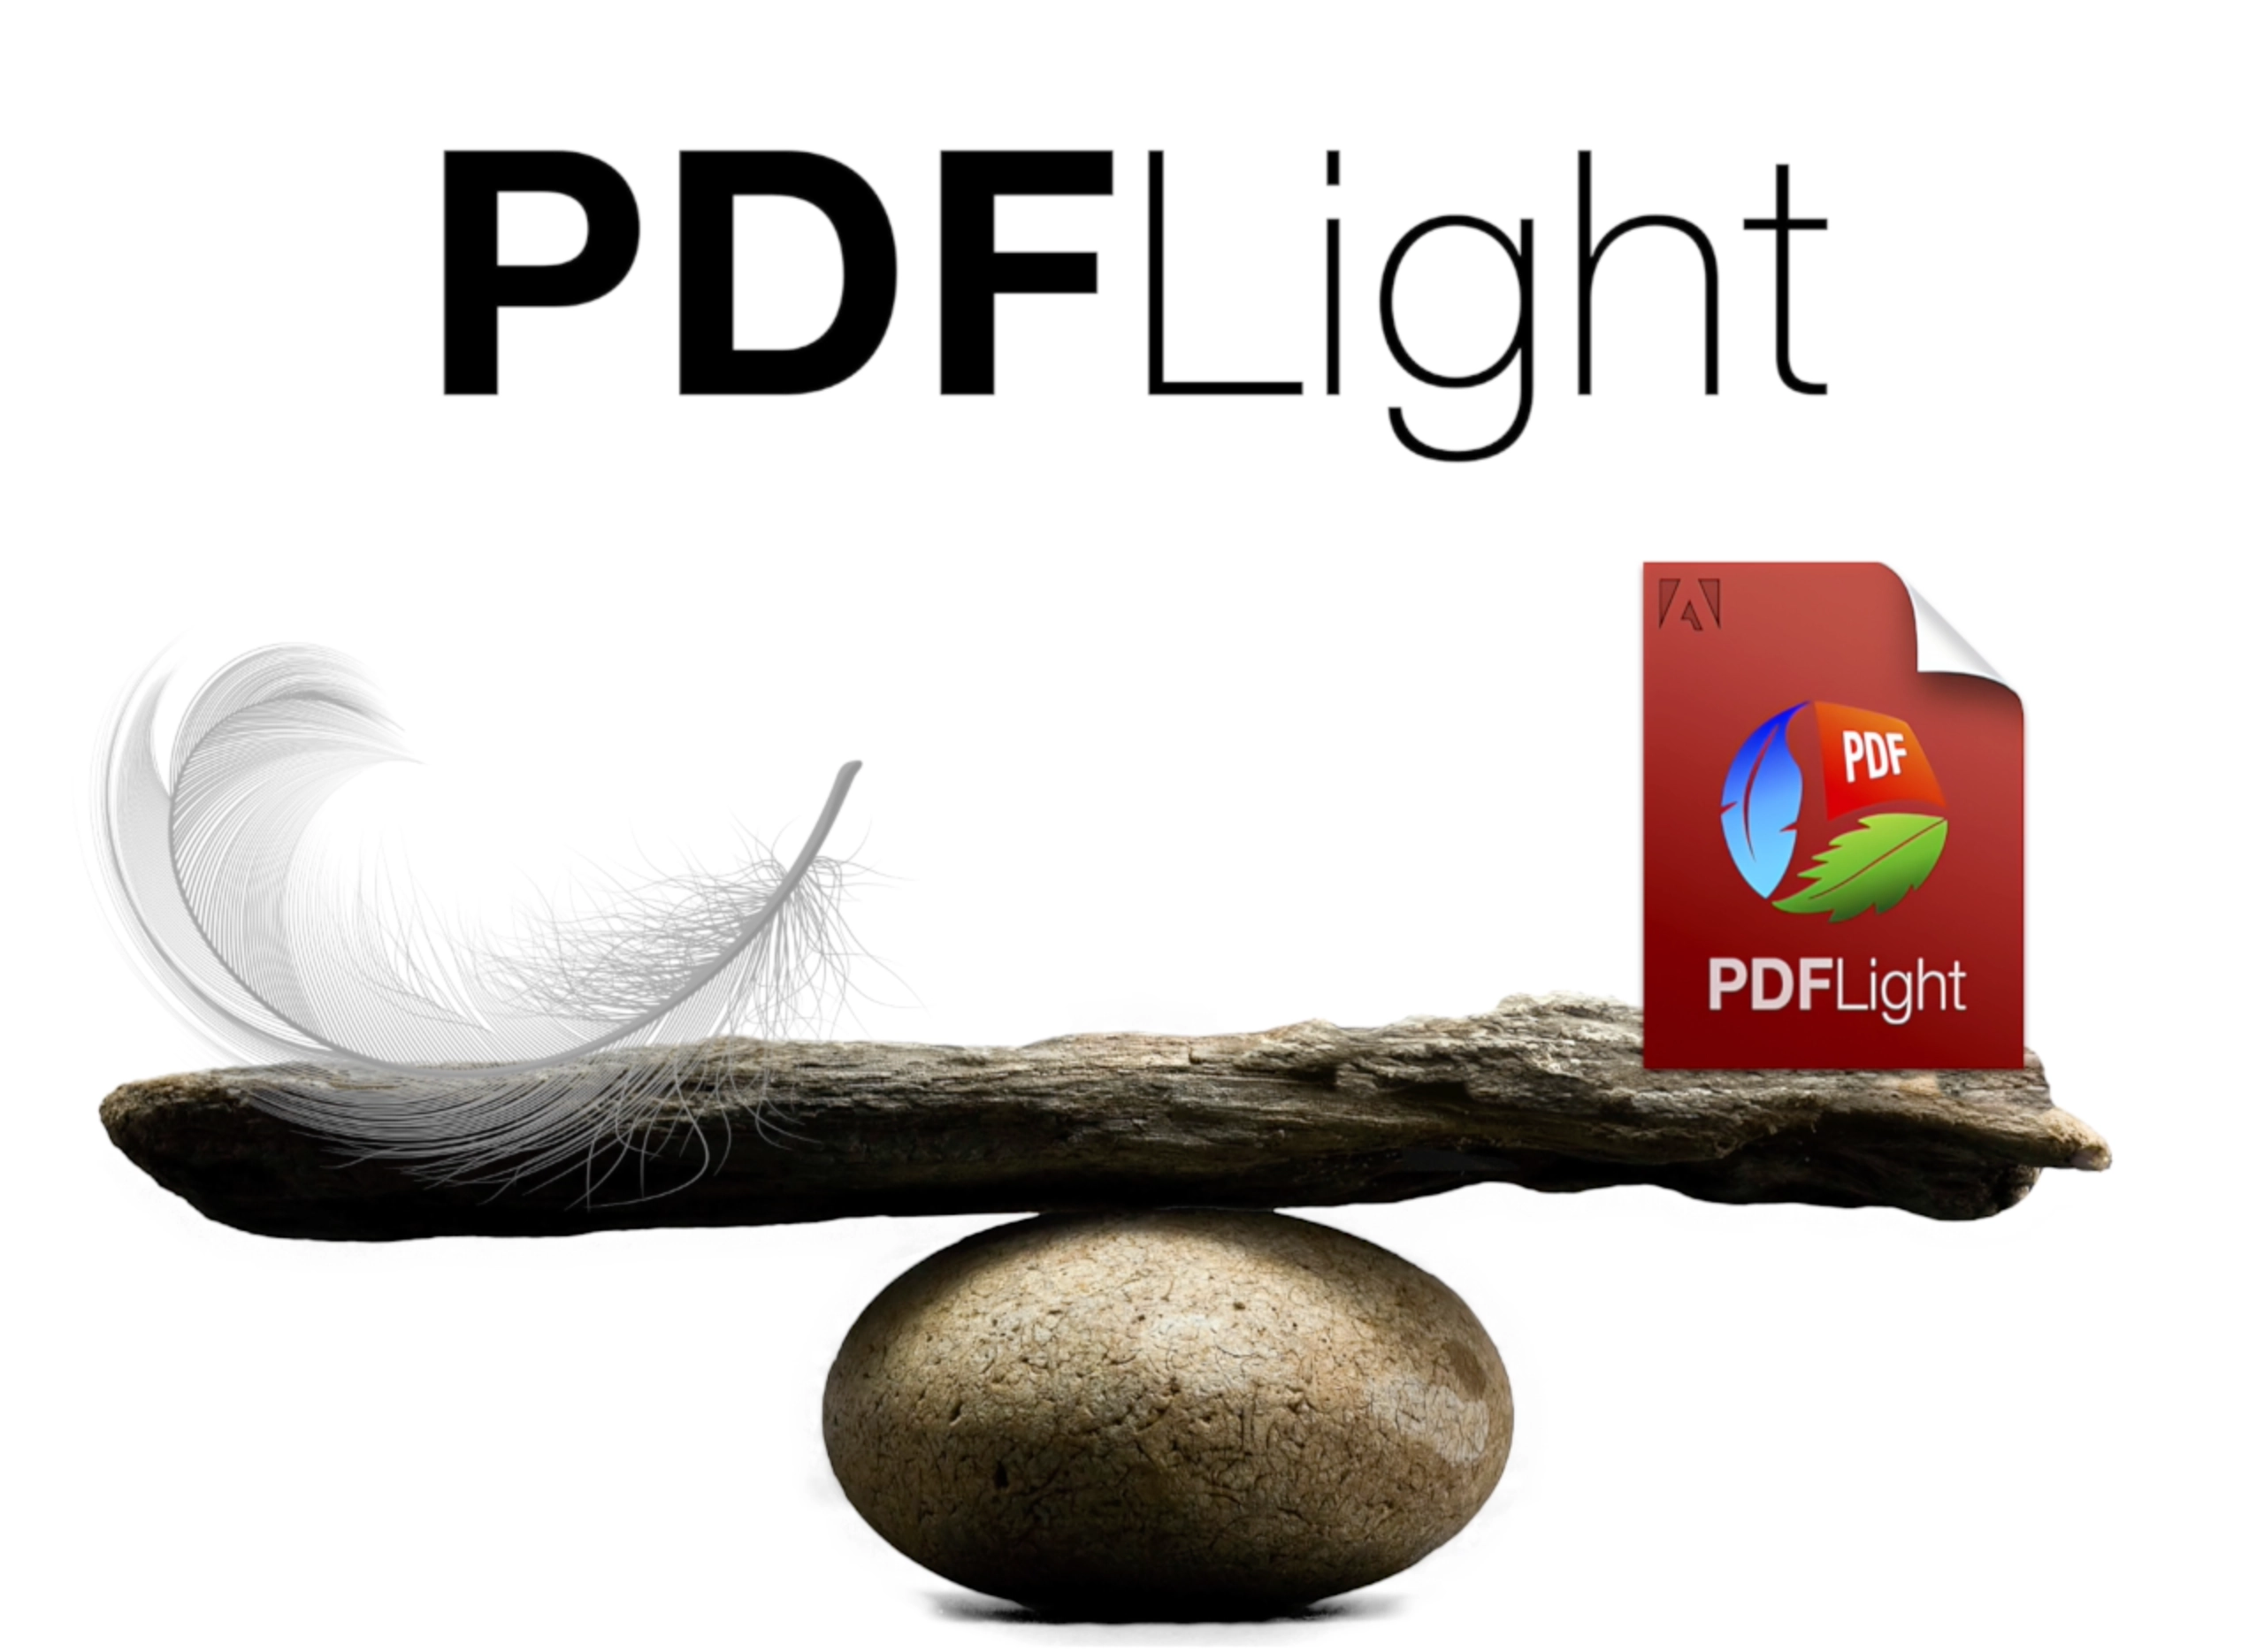 Optimized PDF file created with DALIM PDFLight, shown alongside a feather to illustrate its reduced size and lightweight nature.